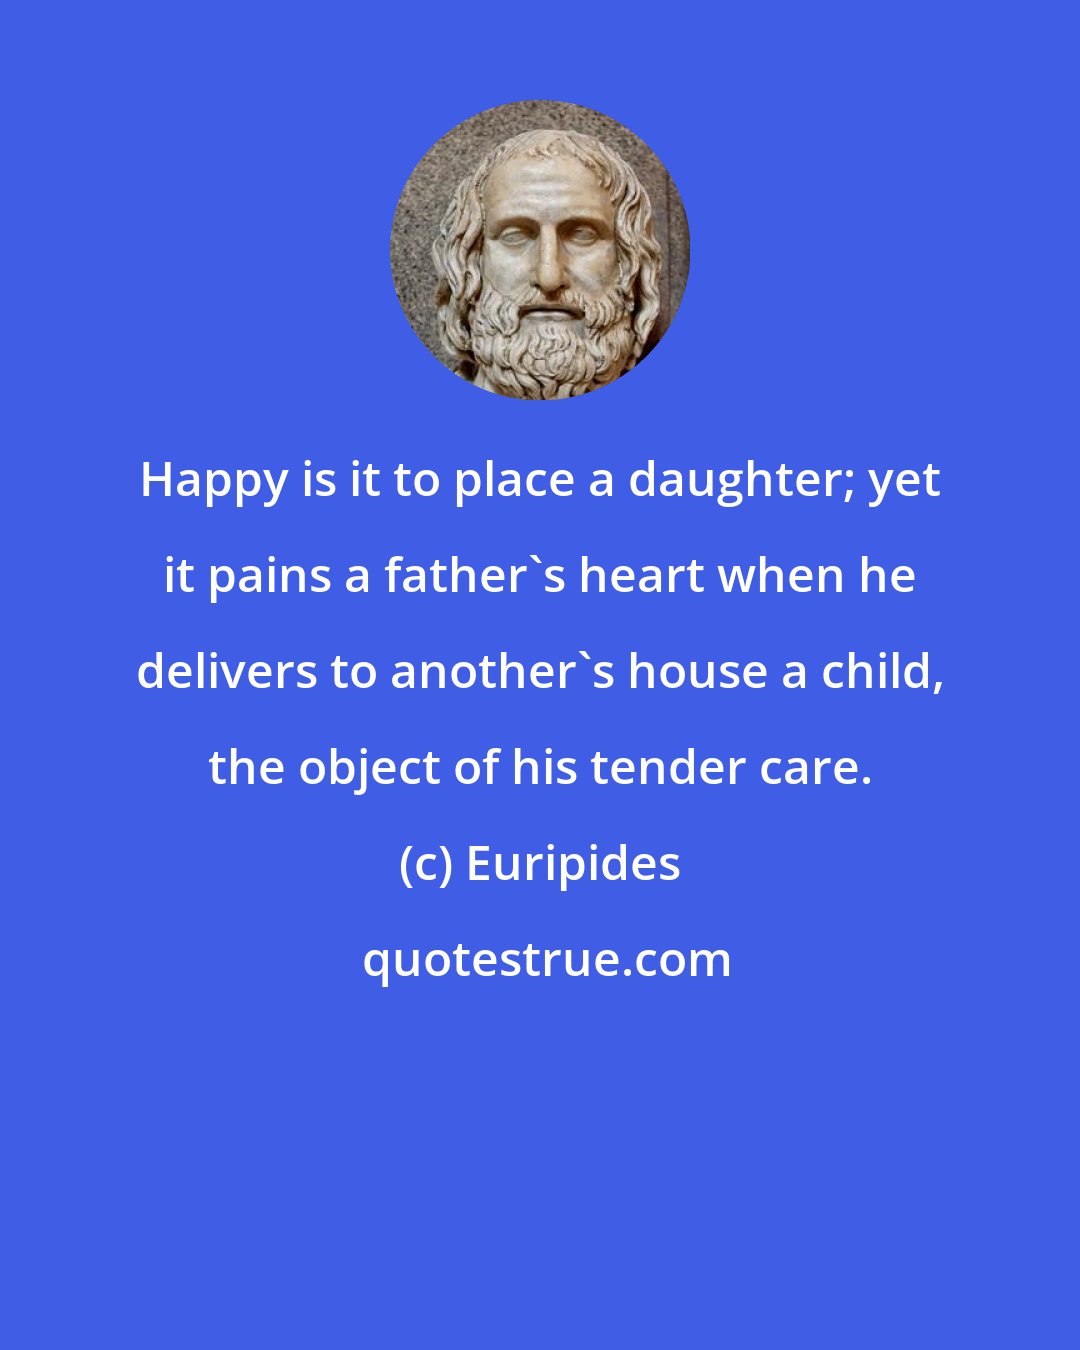 Euripides: Happy is it to place a daughter; yet it pains a father's heart when he delivers to another's house a child, the object of his tender care.